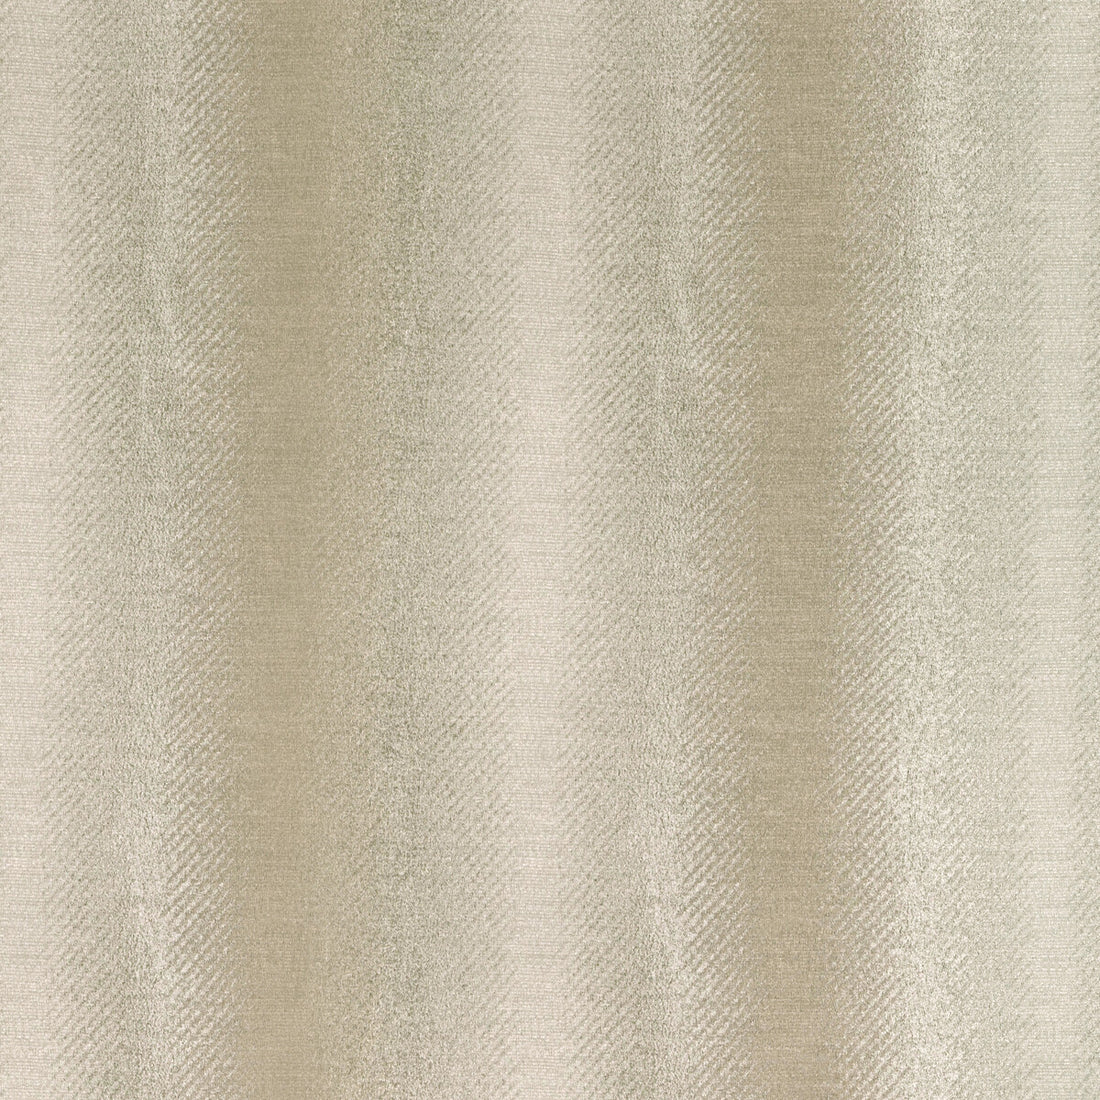 Mystical Ombre fabric in shimmer color - pattern 4962.1611.0 - by Kravet Design in the Candice Olson collection